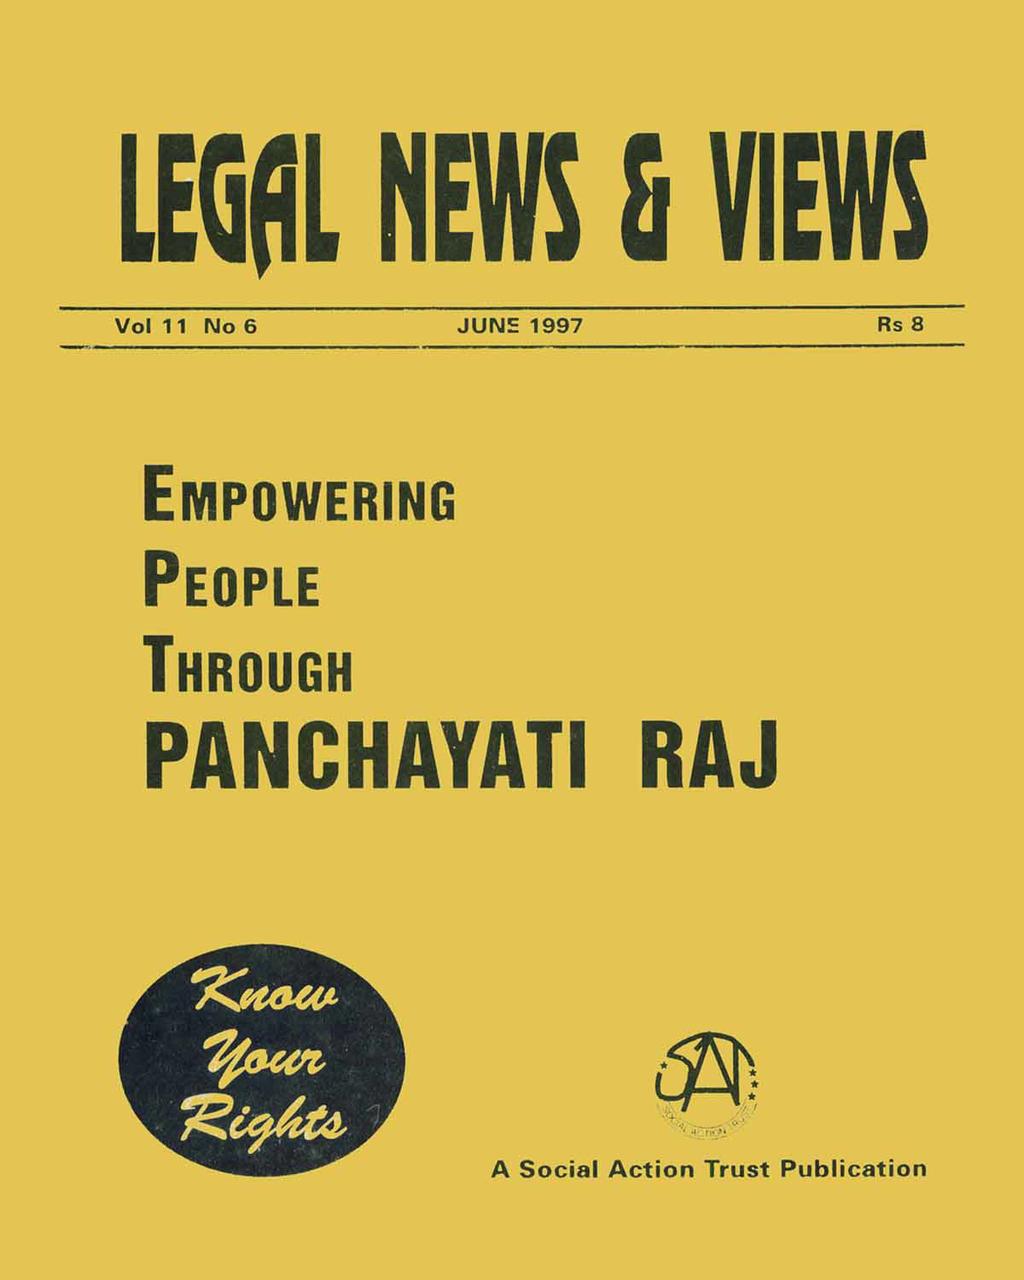 Vol 11 No 6 JUNE 1997 Rs 8 EMPOWERING PEOPLE